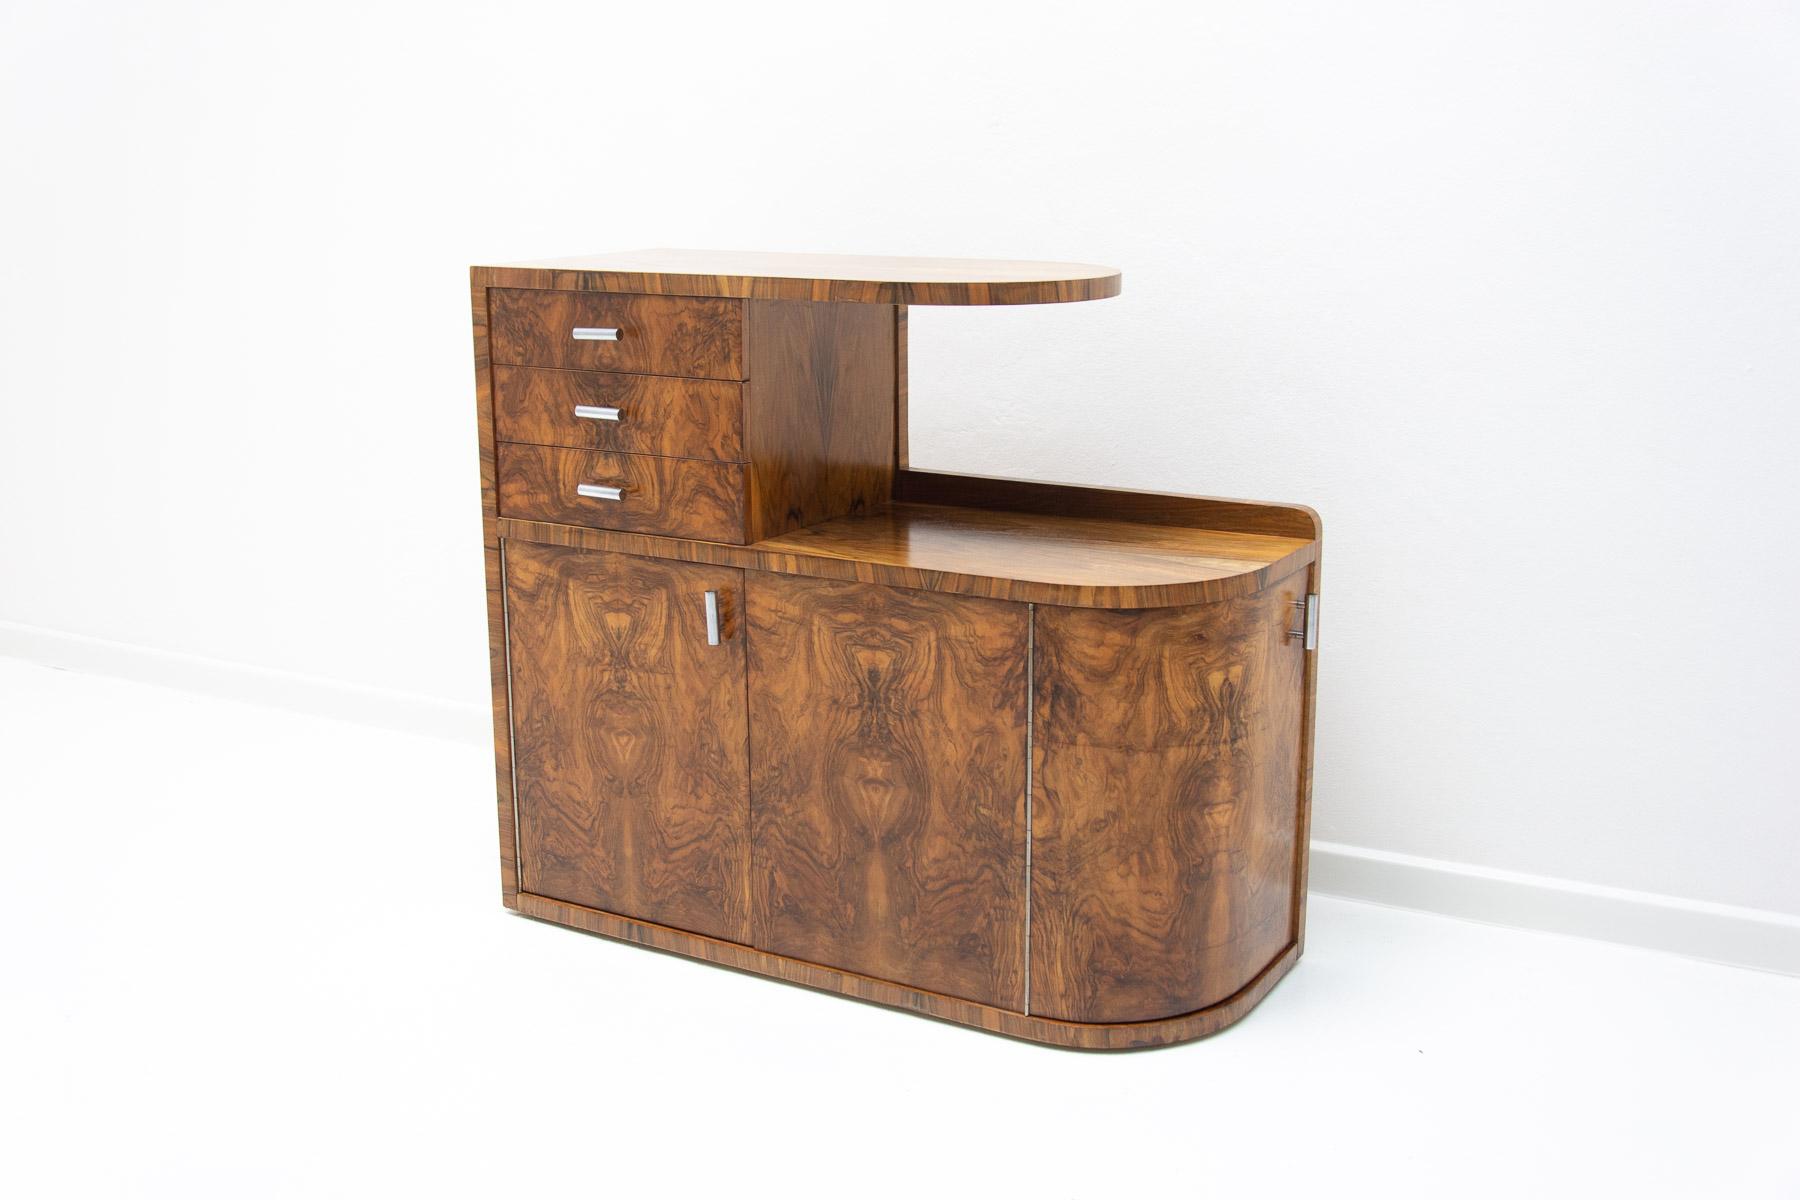 This ART DECO bar or sideboard was made in the 1930´s in the former Czechoslovakia.

It´s charakterized a very simple and practical design. Consists of two storage spaces with opening doors and three drawers.
It´s a beautiful example of Central